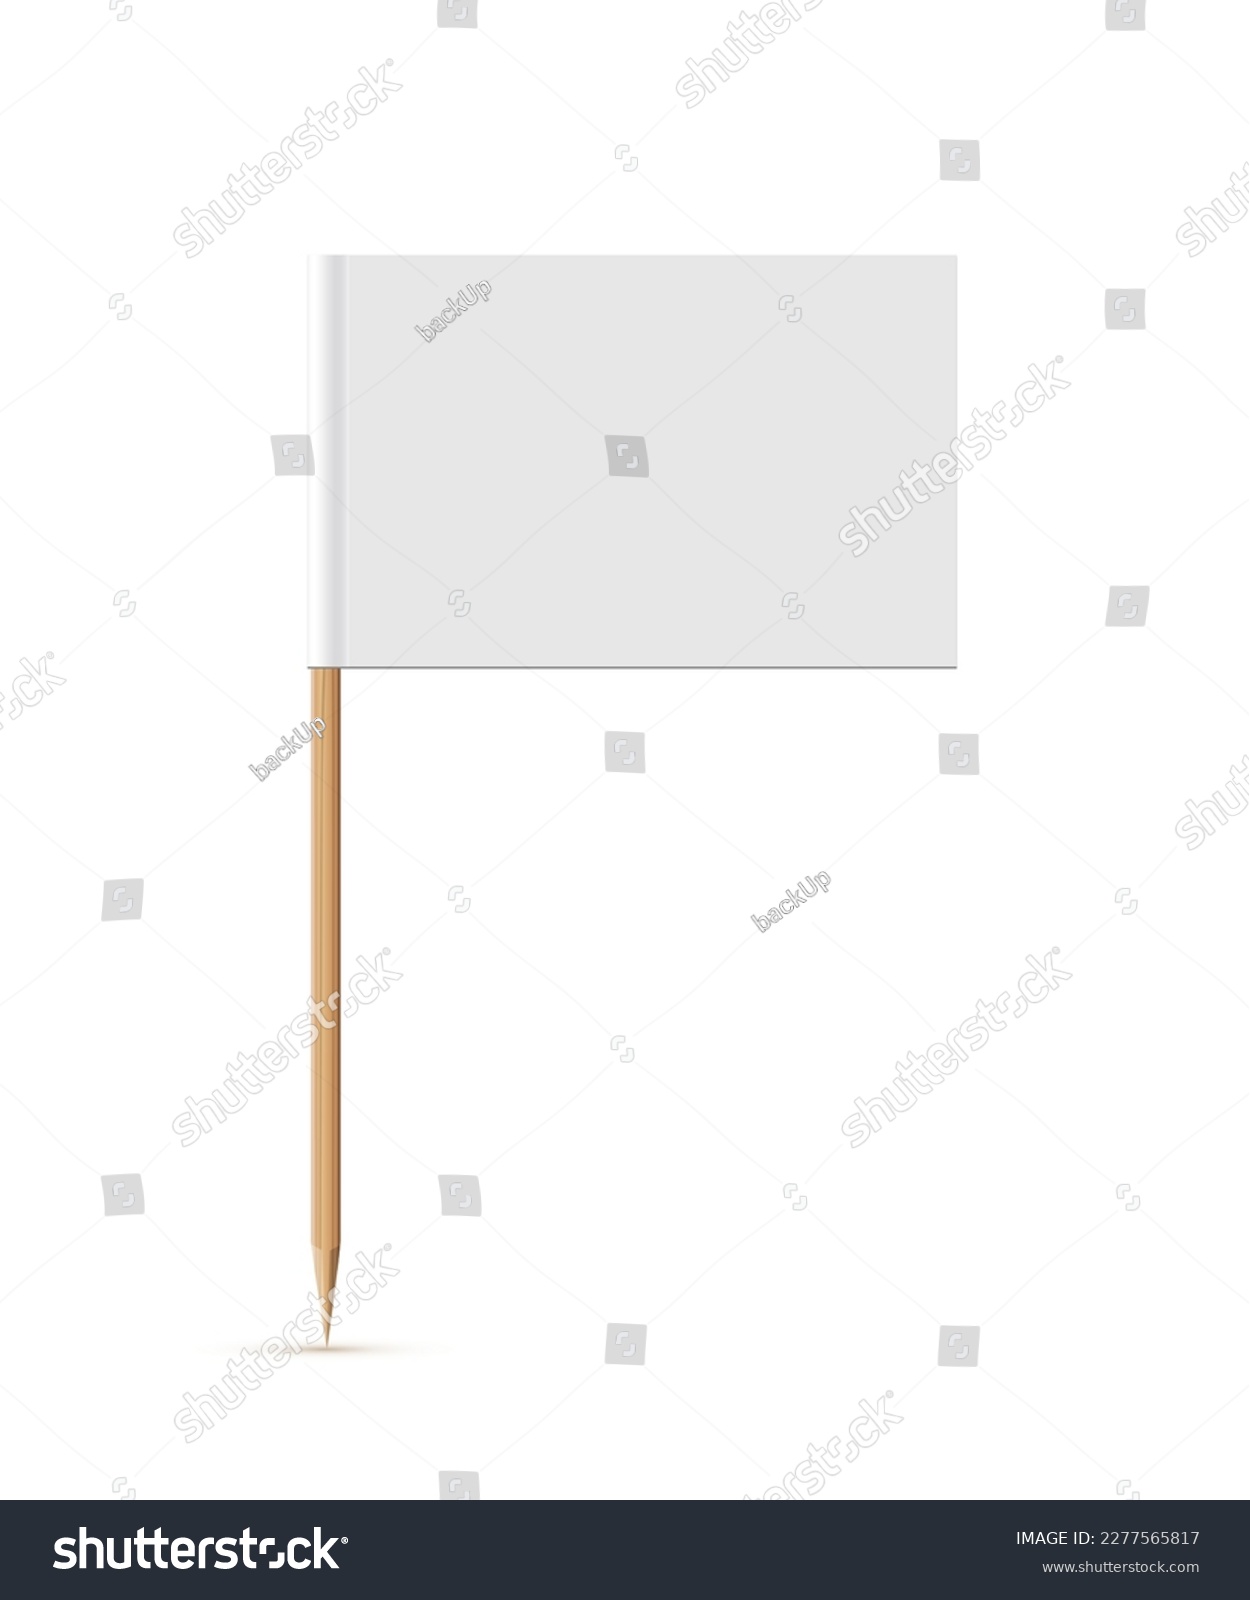 SVG of White flag on wooden toothpick. Rectangle paper topper for cake or other food isolated on white background. Blank mockup for advertising and promotions, location mark, map pointer. svg